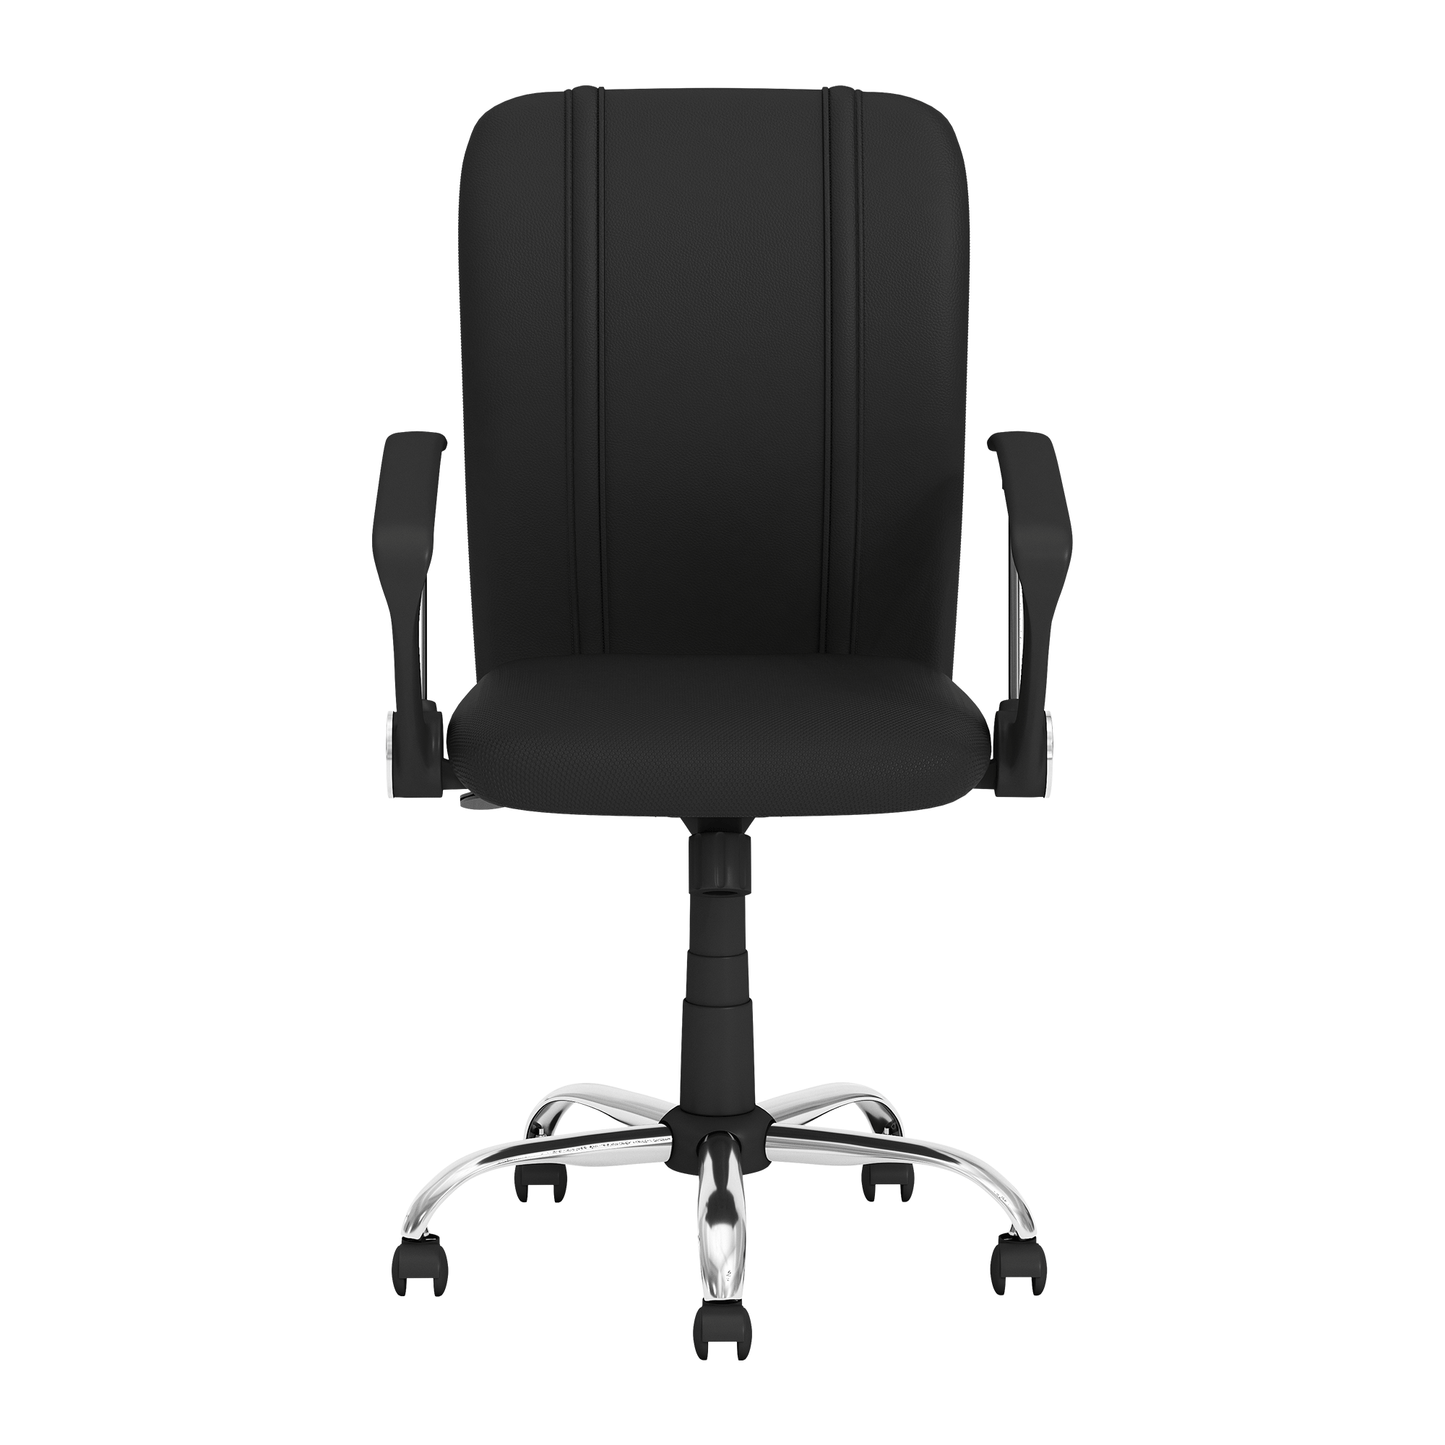 Curve Task Chair with Mississippi State Alternate